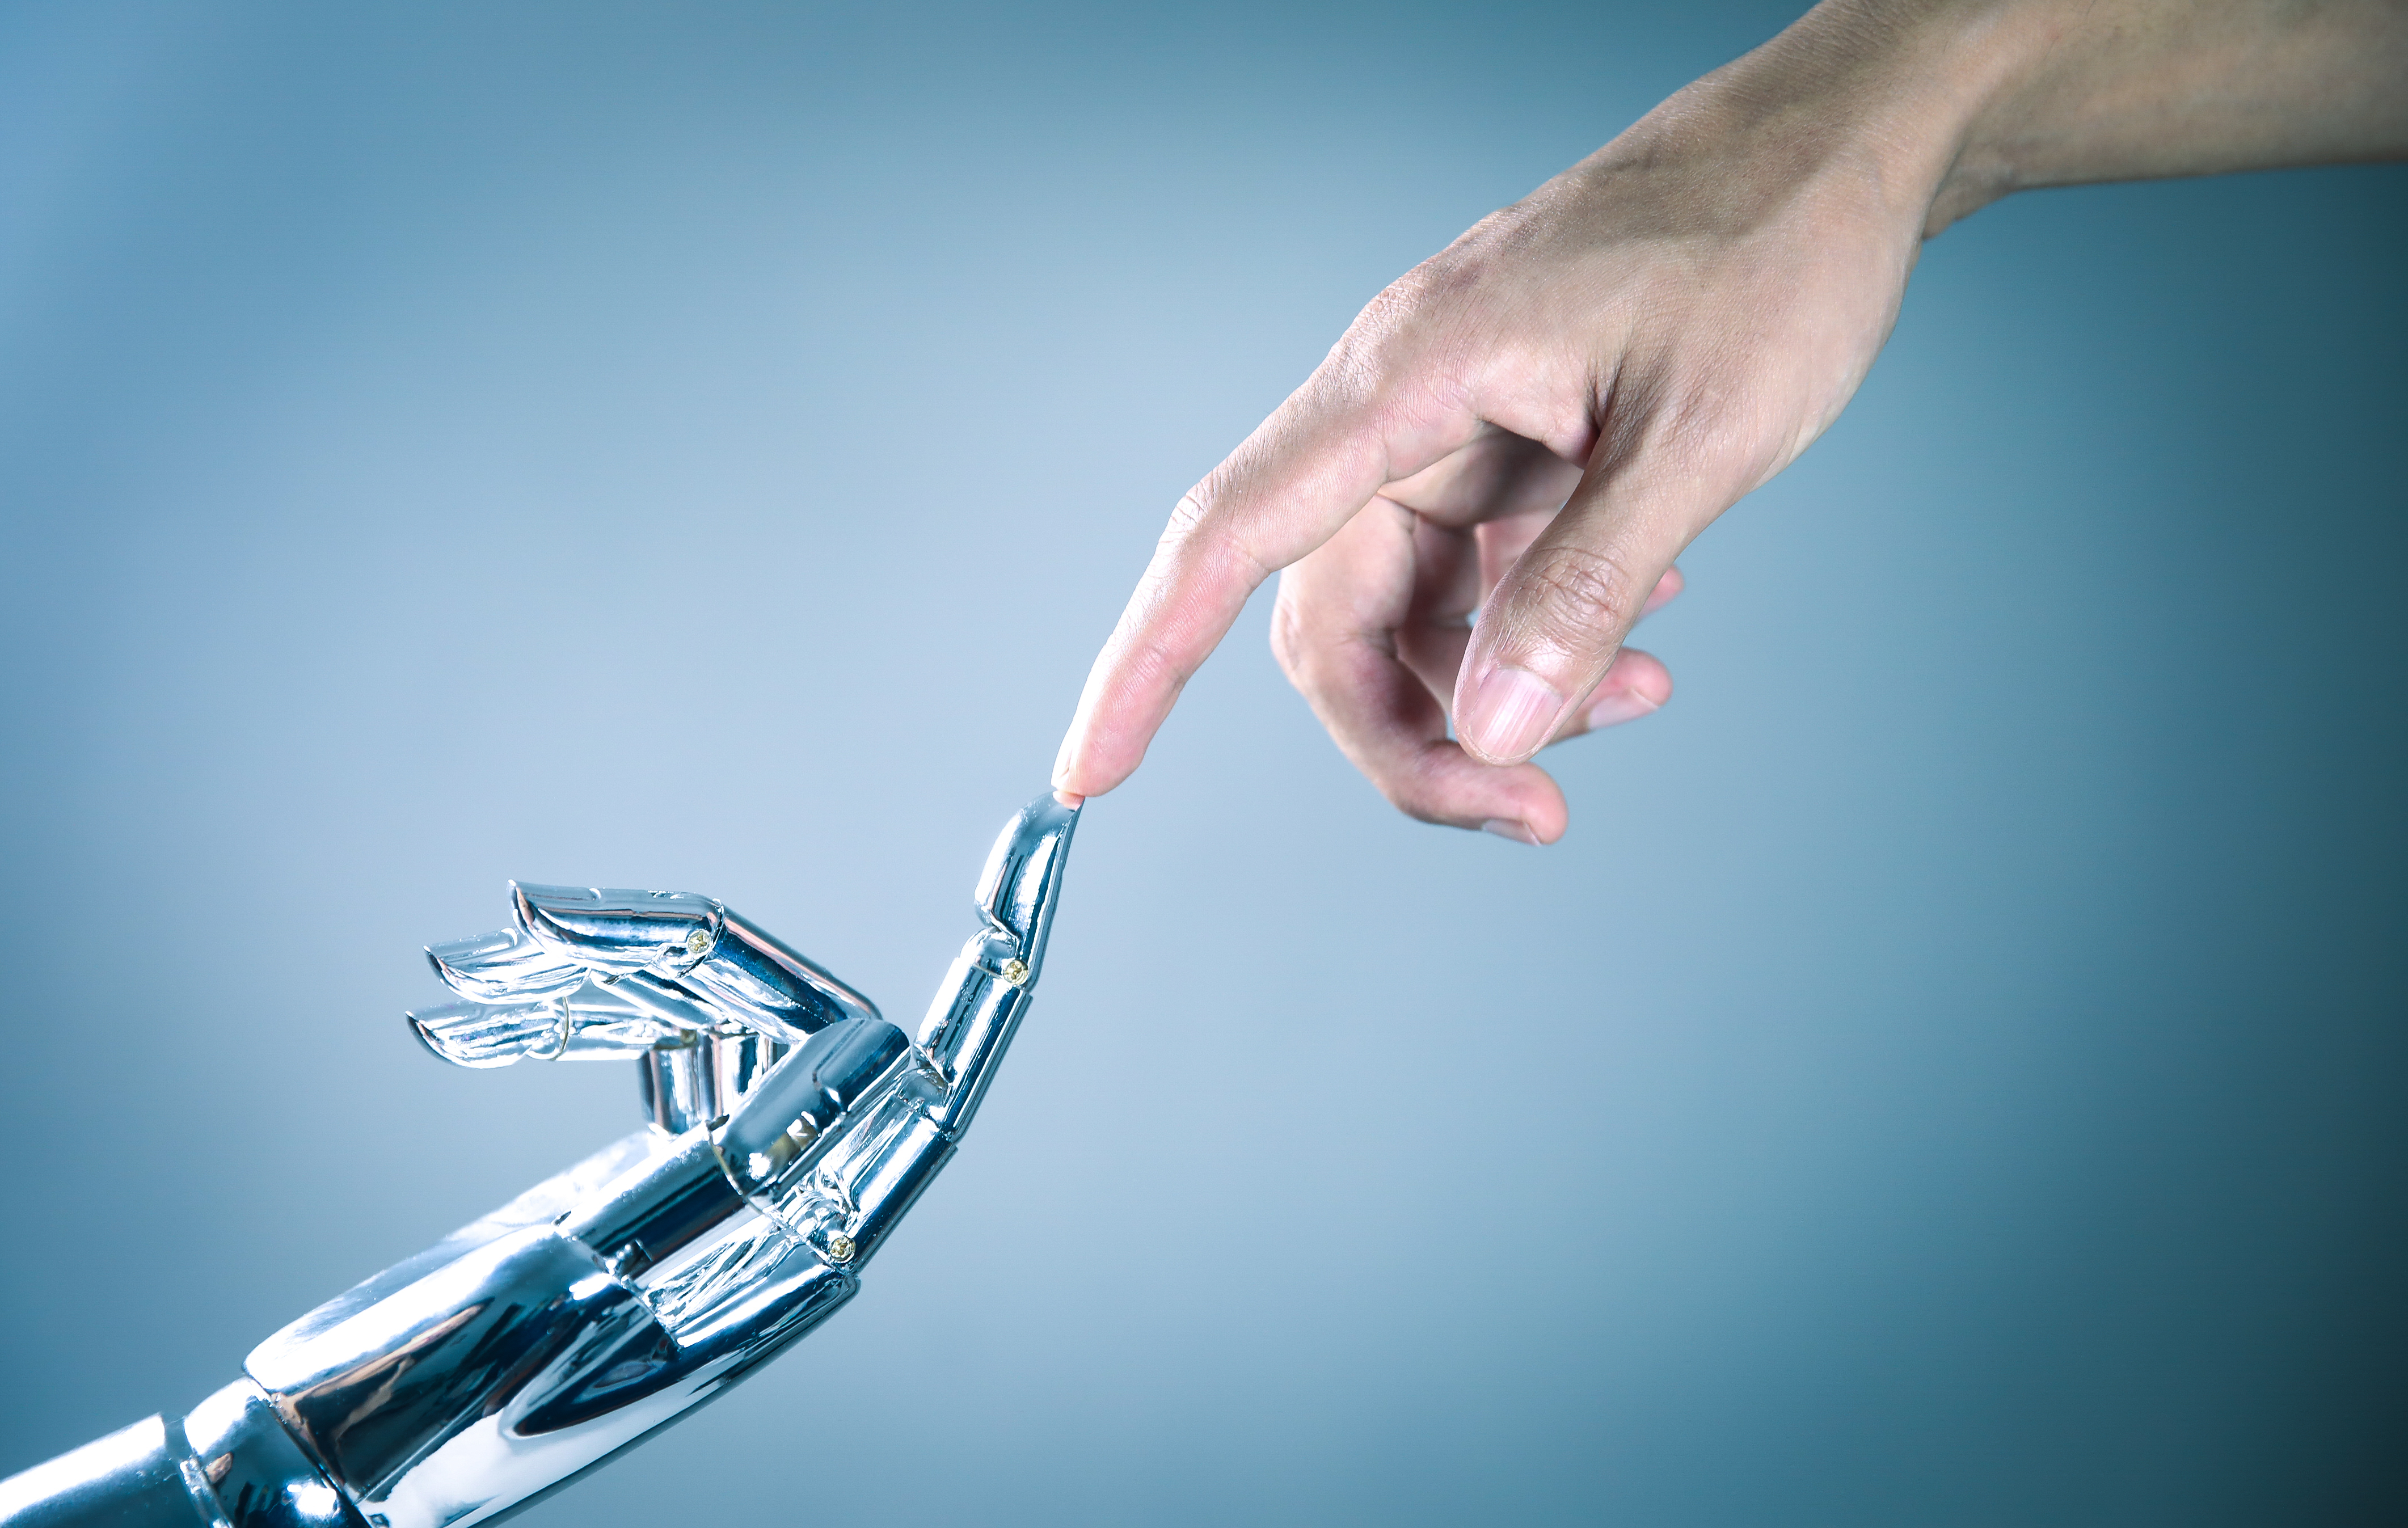 Human and robot hand connecting